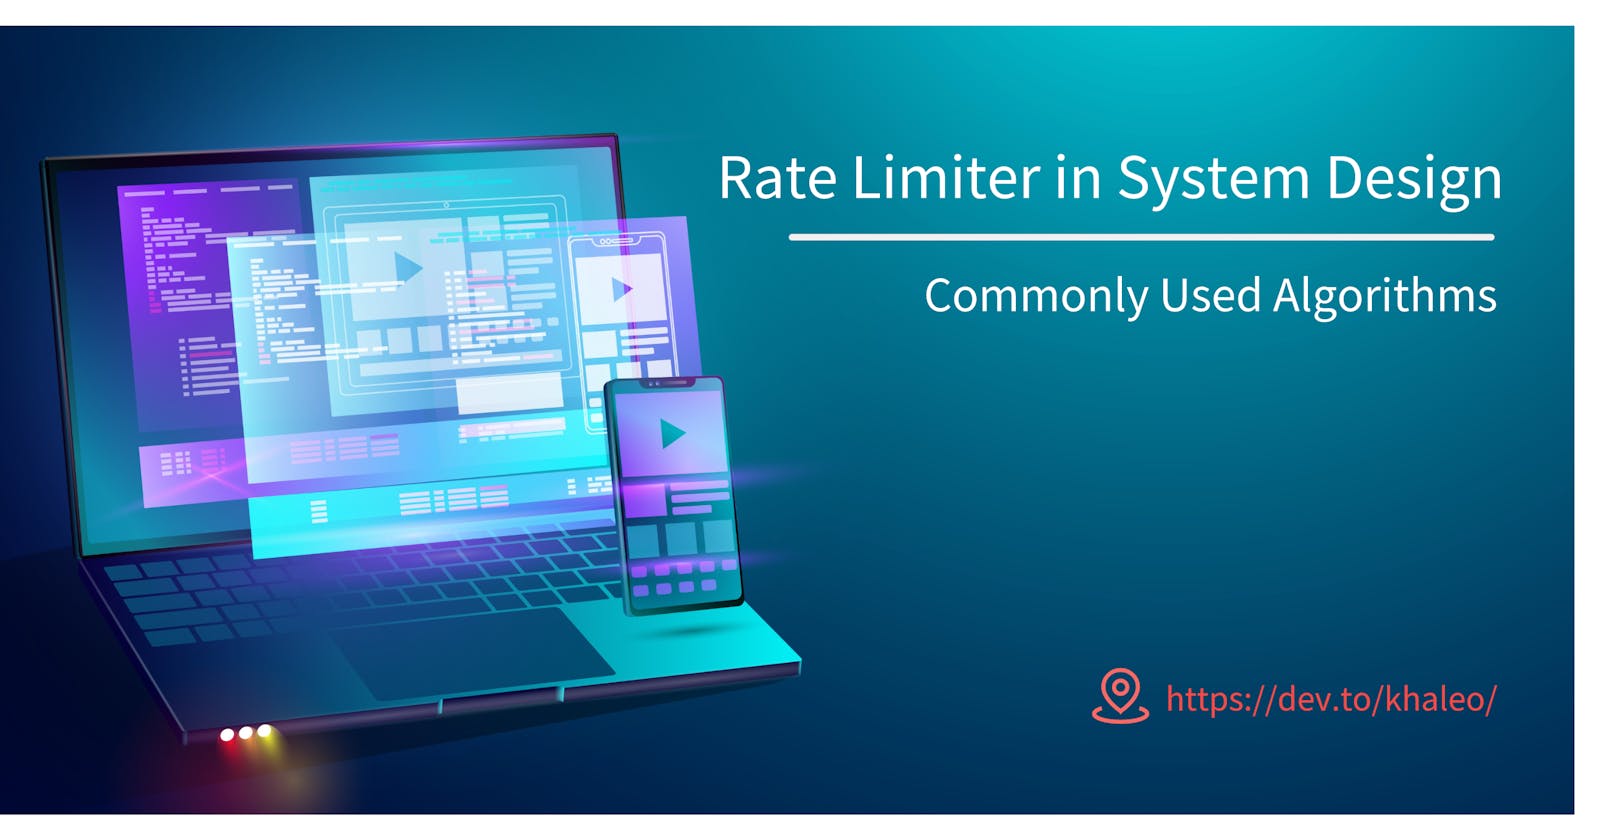 Rate Limiter in System Design. Part 2 - Commonly Used Algorithms